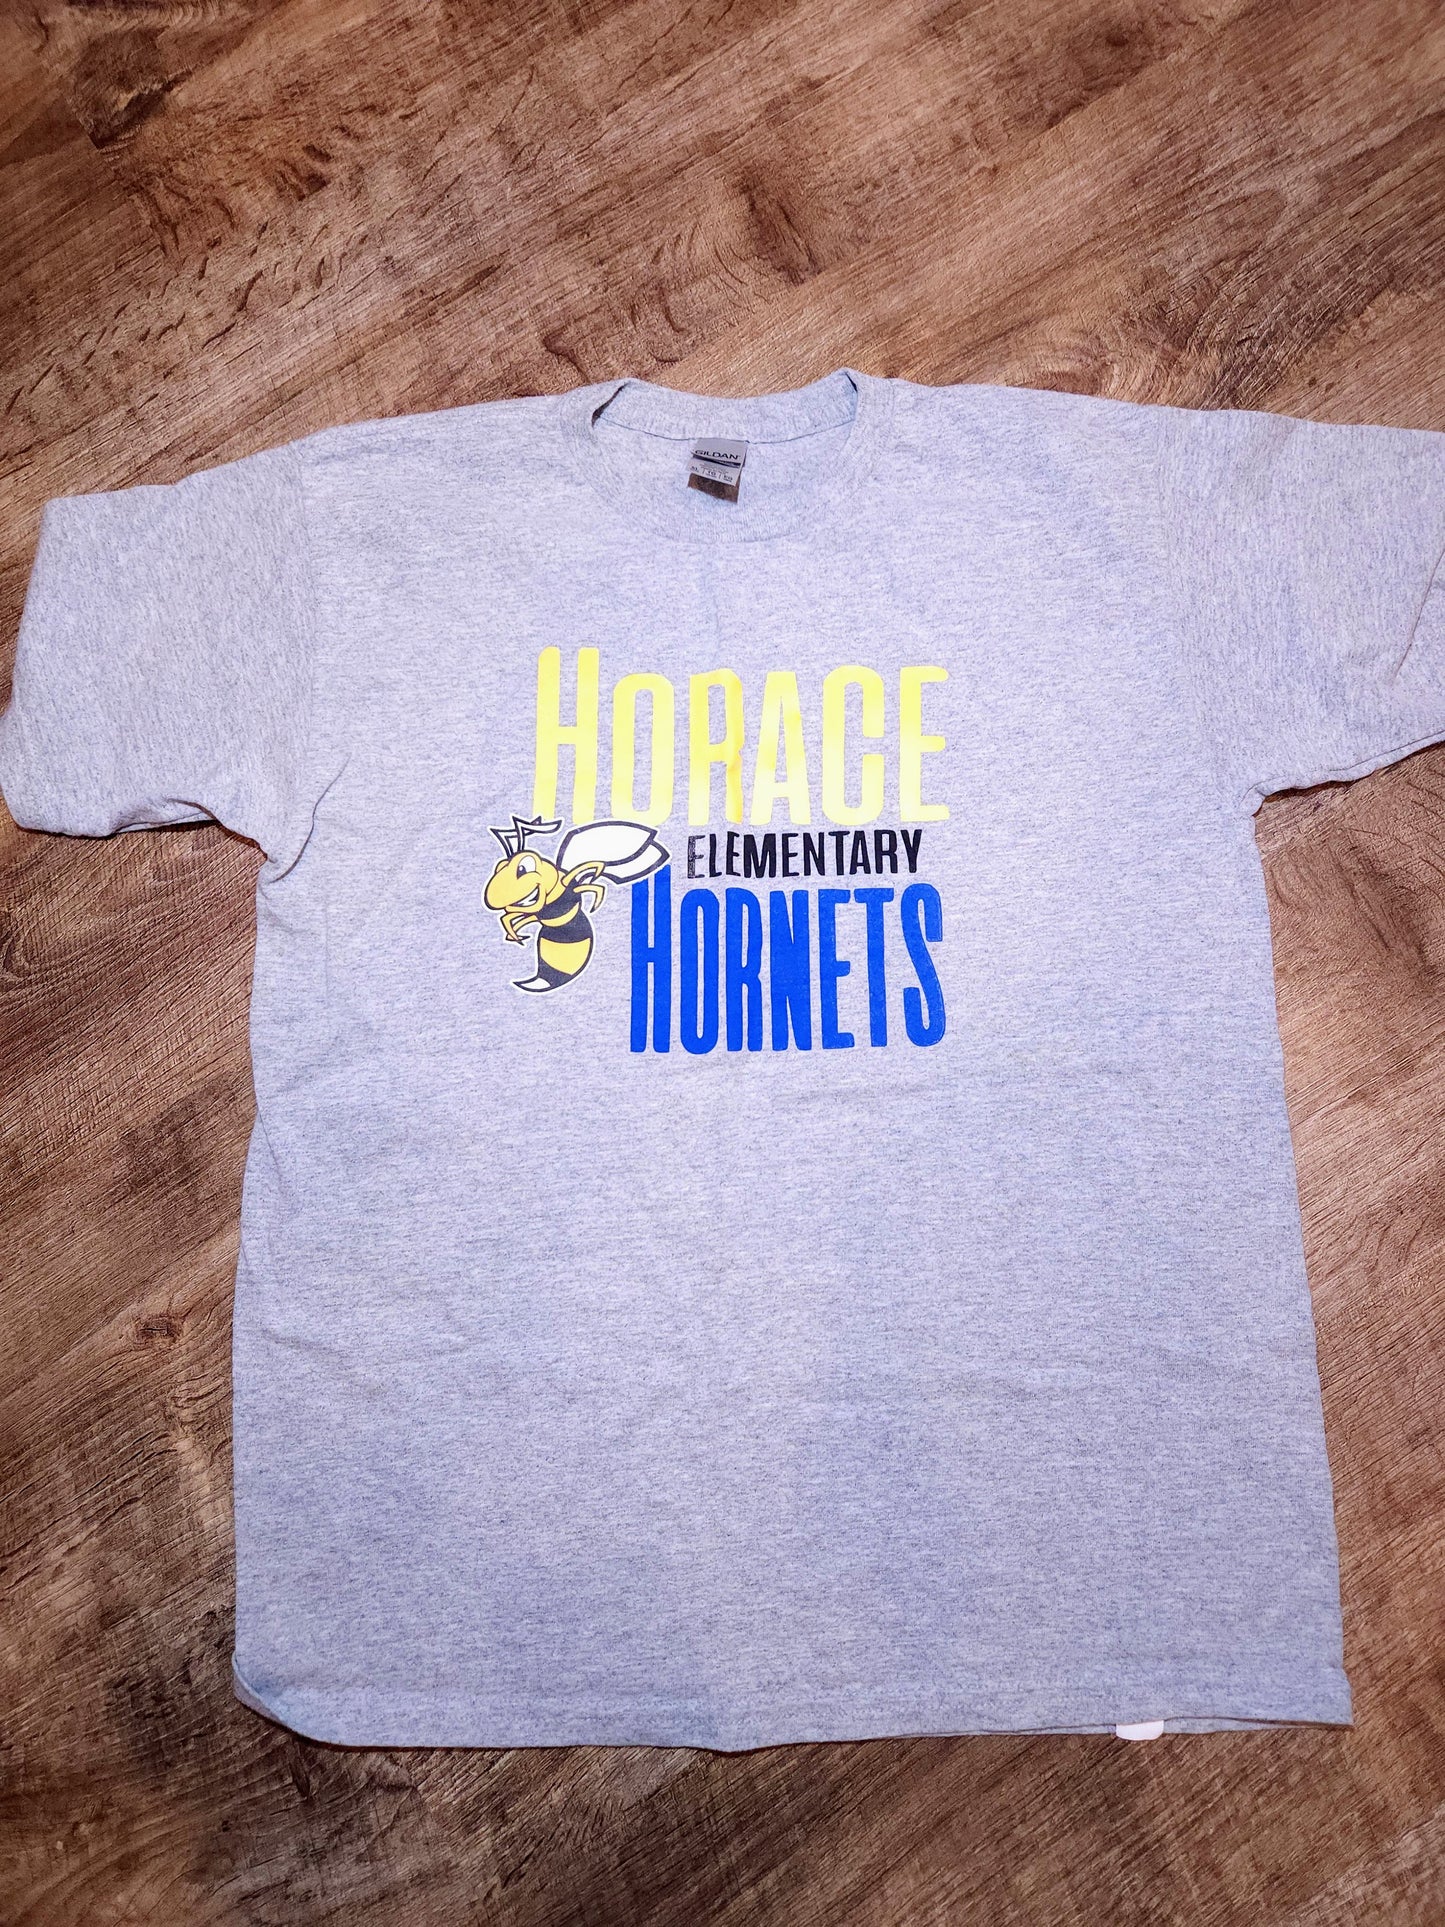 Horace Student elementary grey t shirt